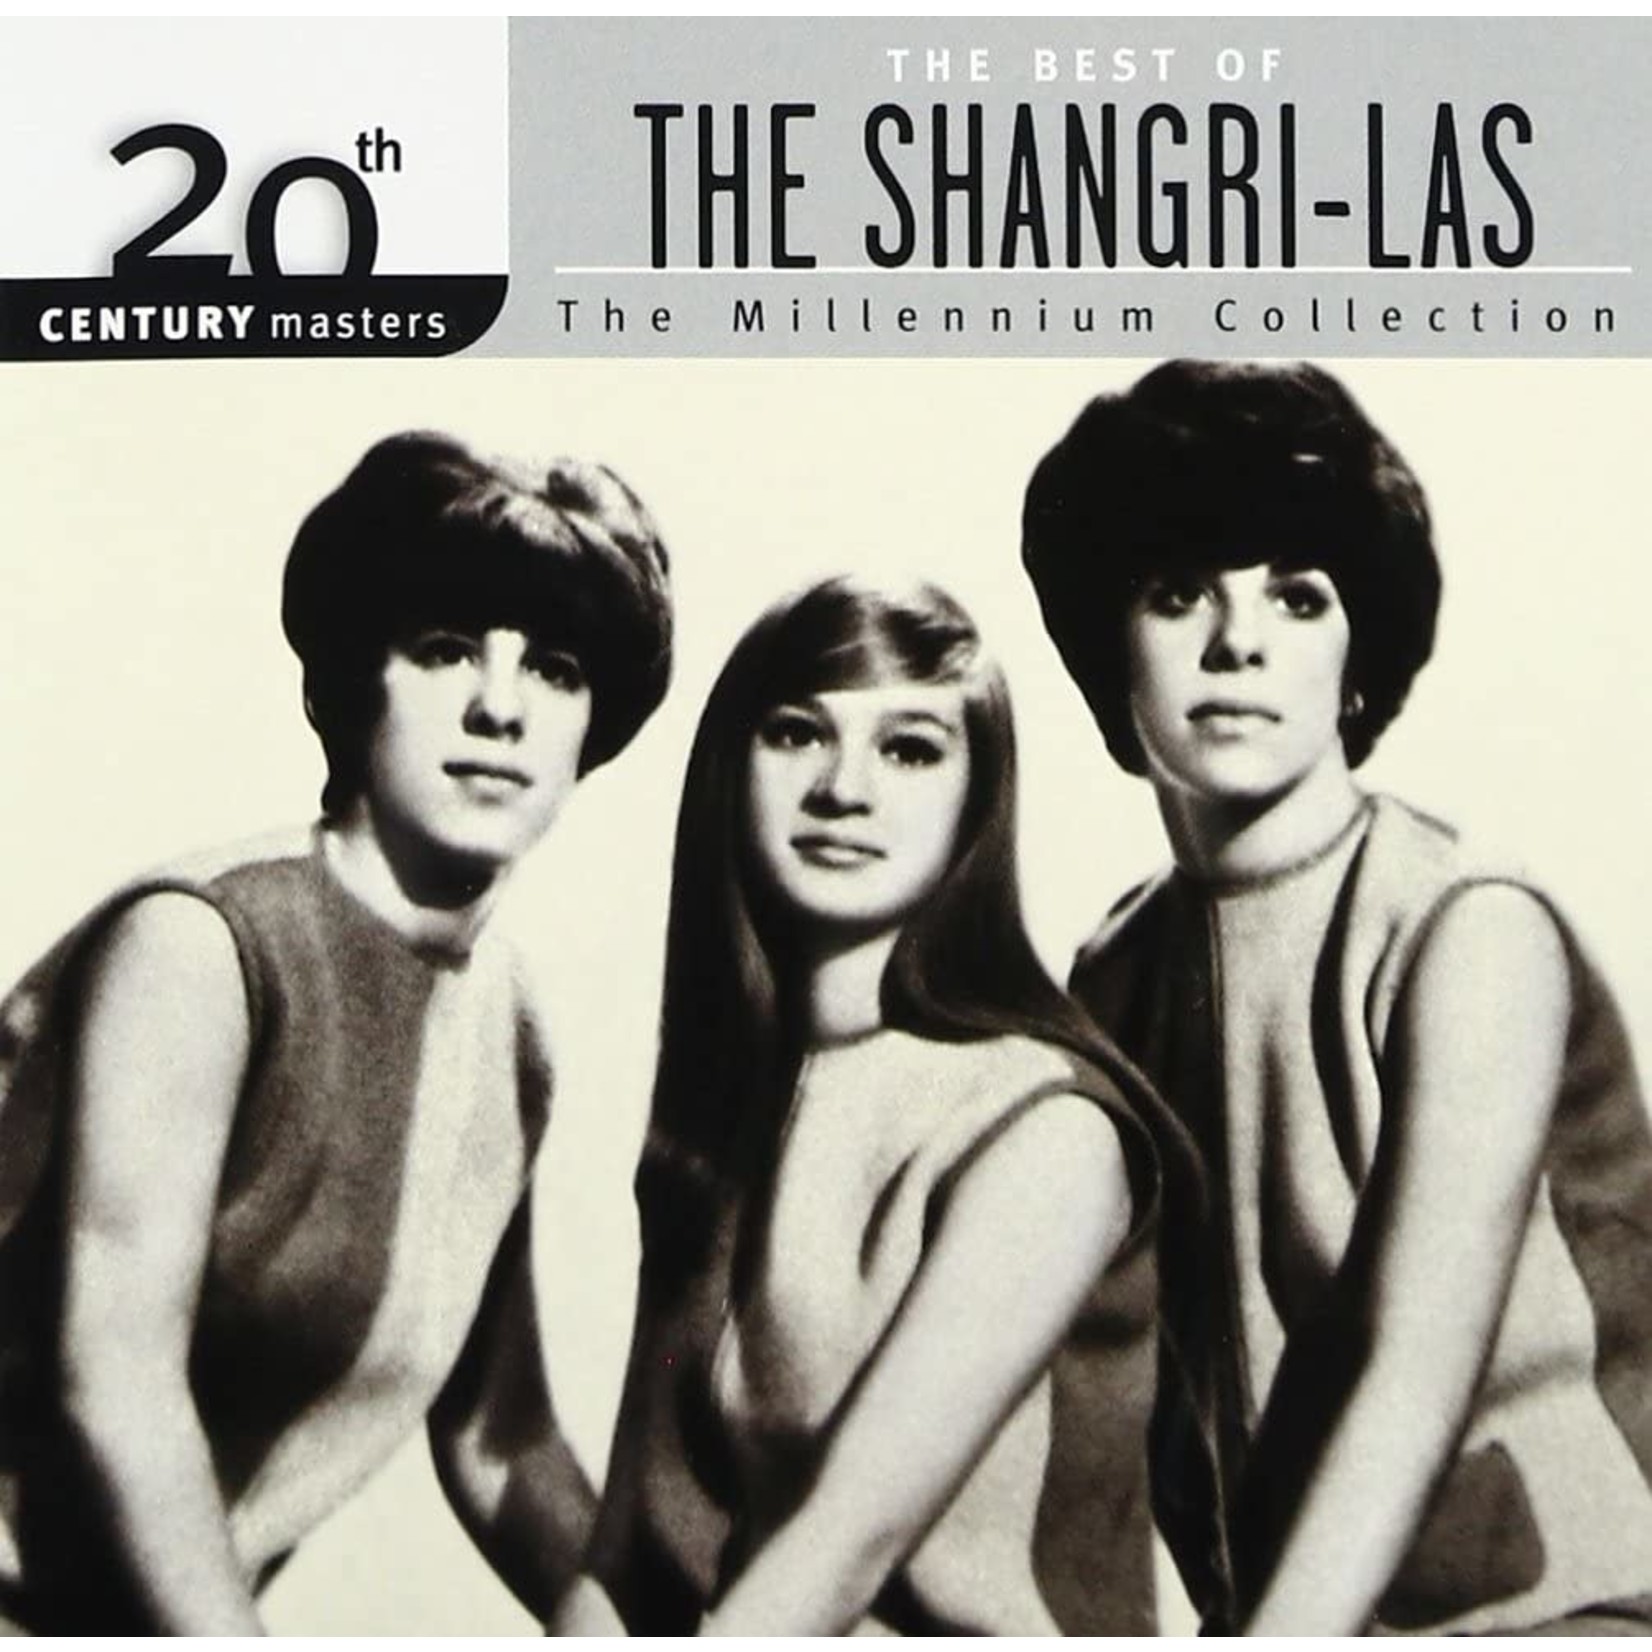 Shangri-Las - The Best Of The Shangri-Las: 20th Century Masters The Millenium Collection [USED CD]